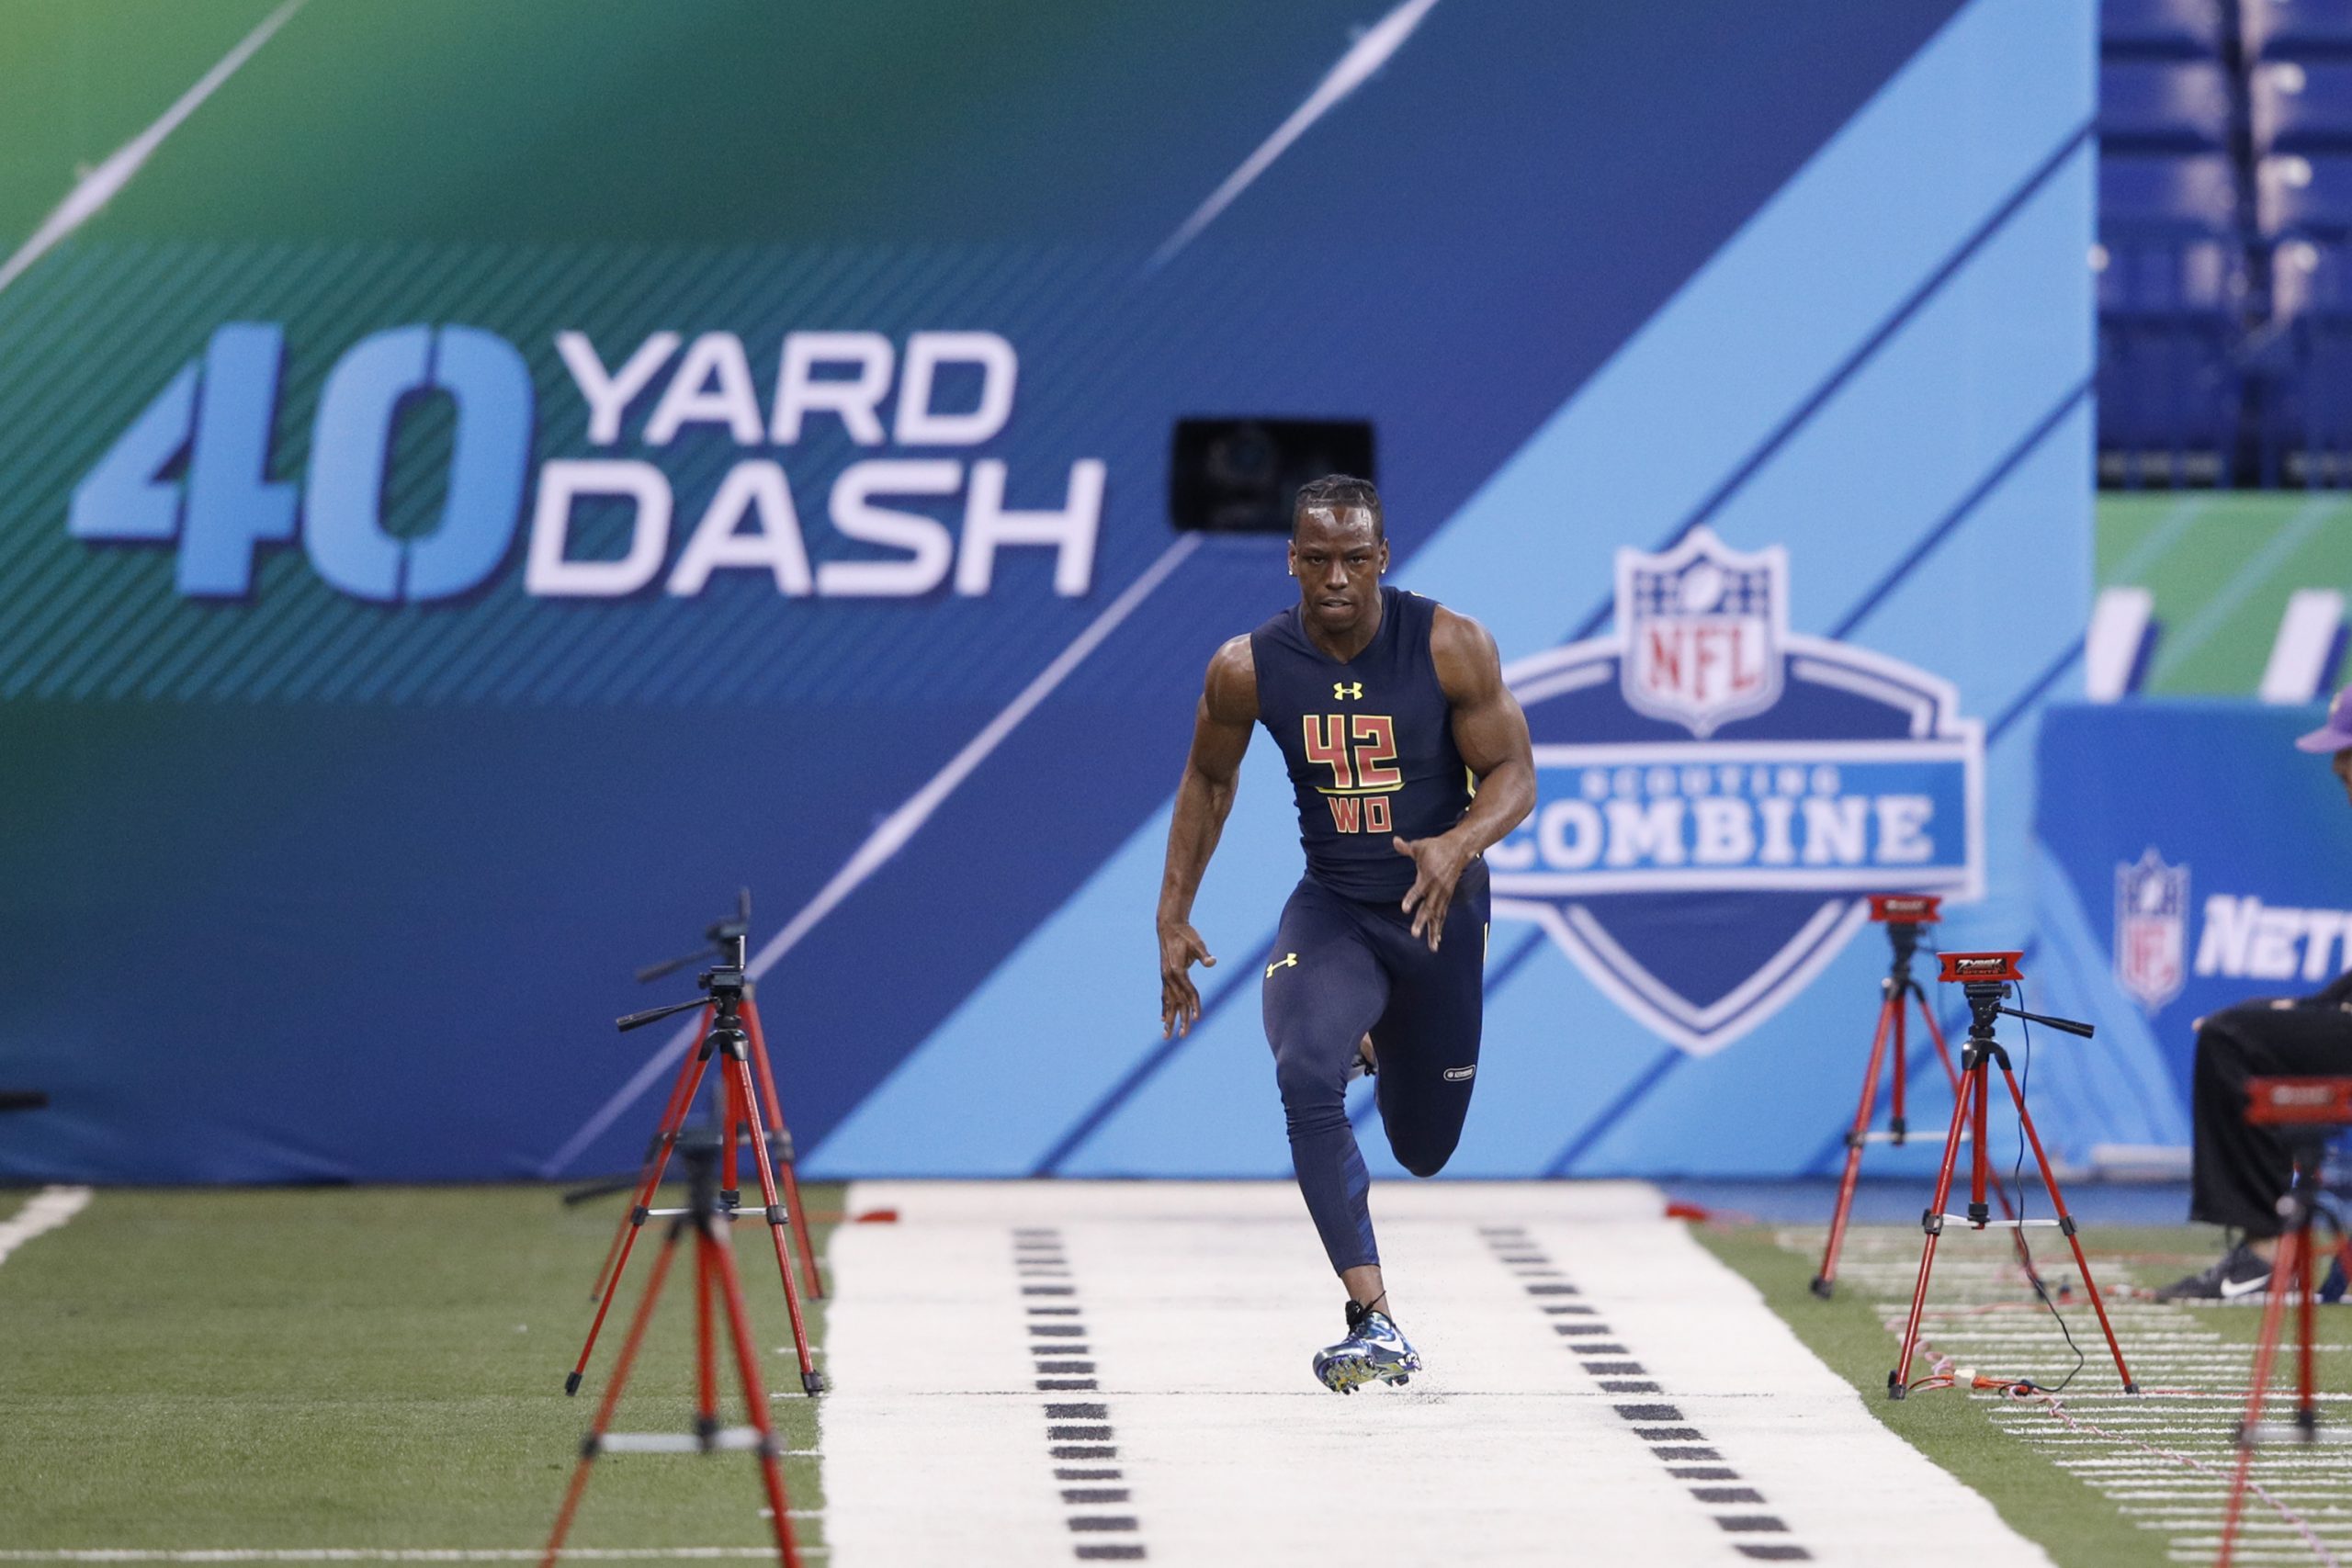 Wide receiver John Ross of Washington runs the 40-yard dash in an unofficial record time of 4.22 se...